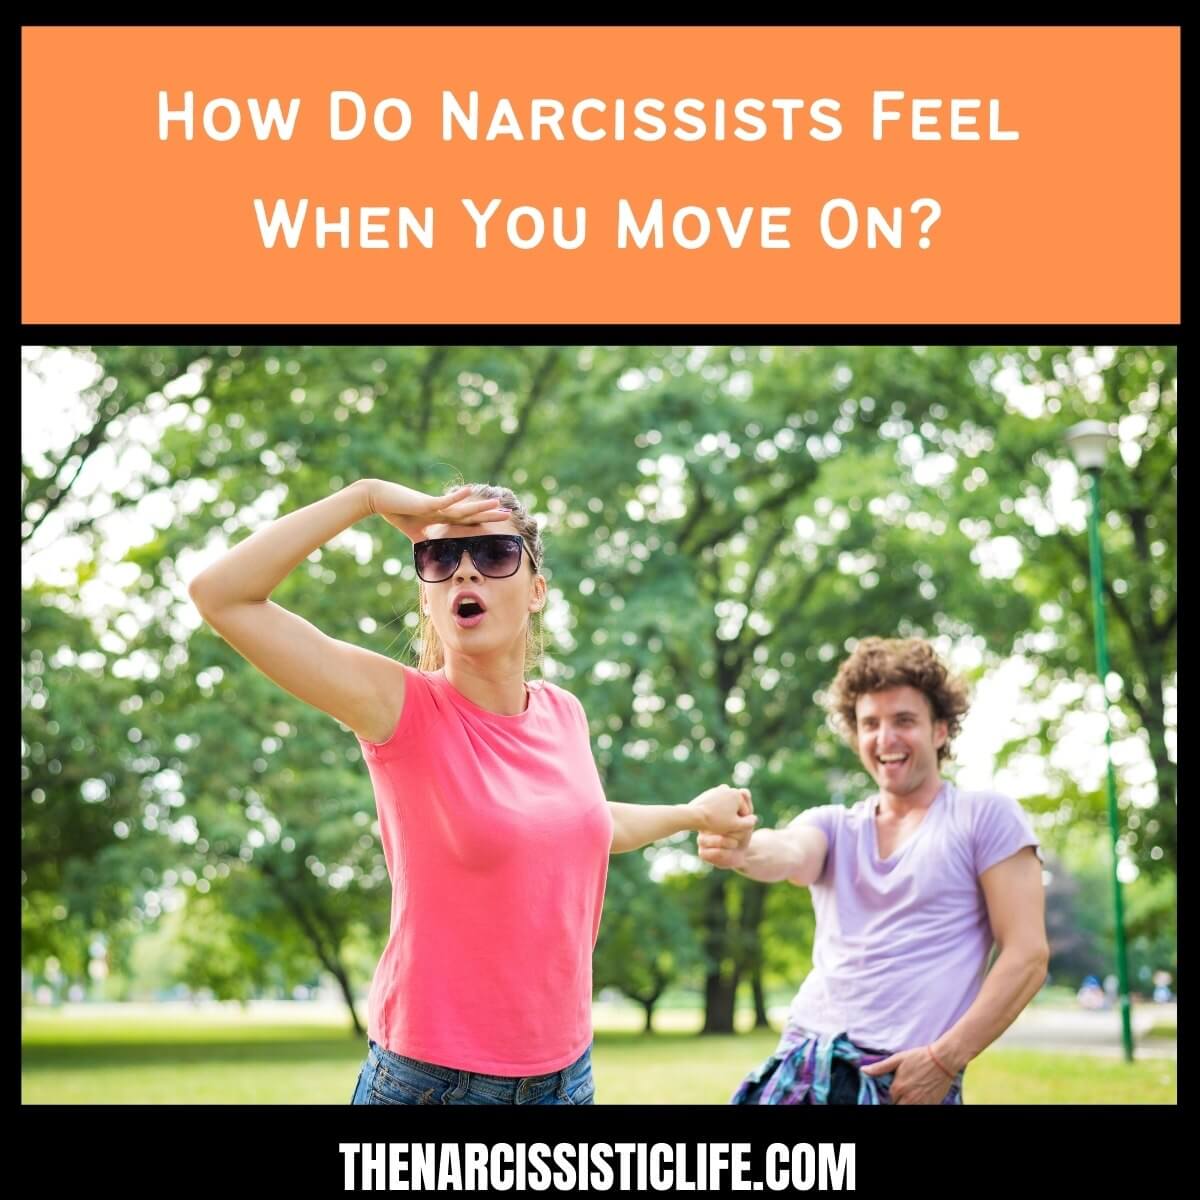 How Do Narcissists Feel When You Move On?